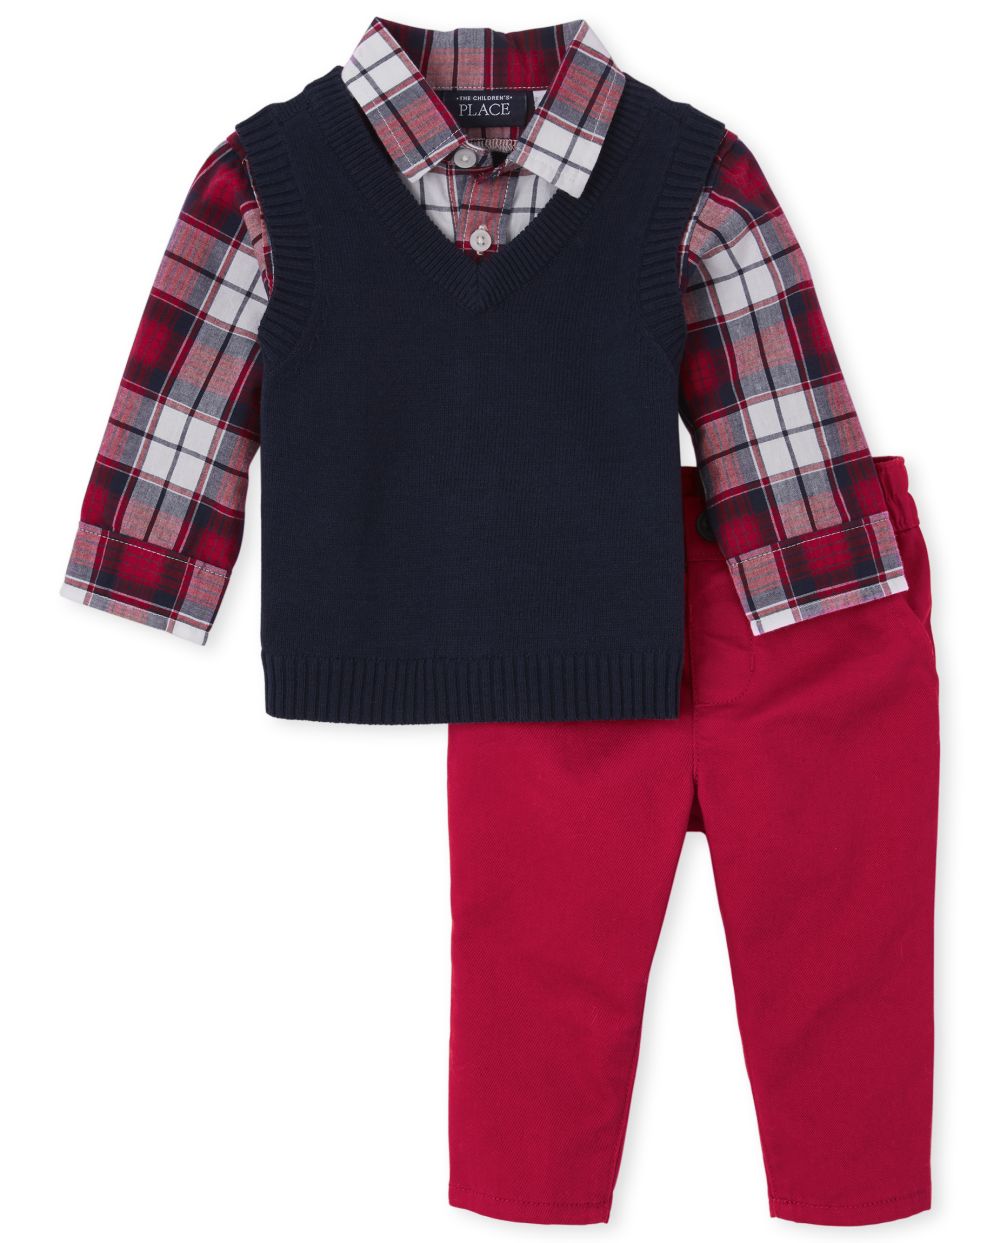 

s Baby Boys Plaid Sweater Vest Outfit Set - Red - The Children's Place